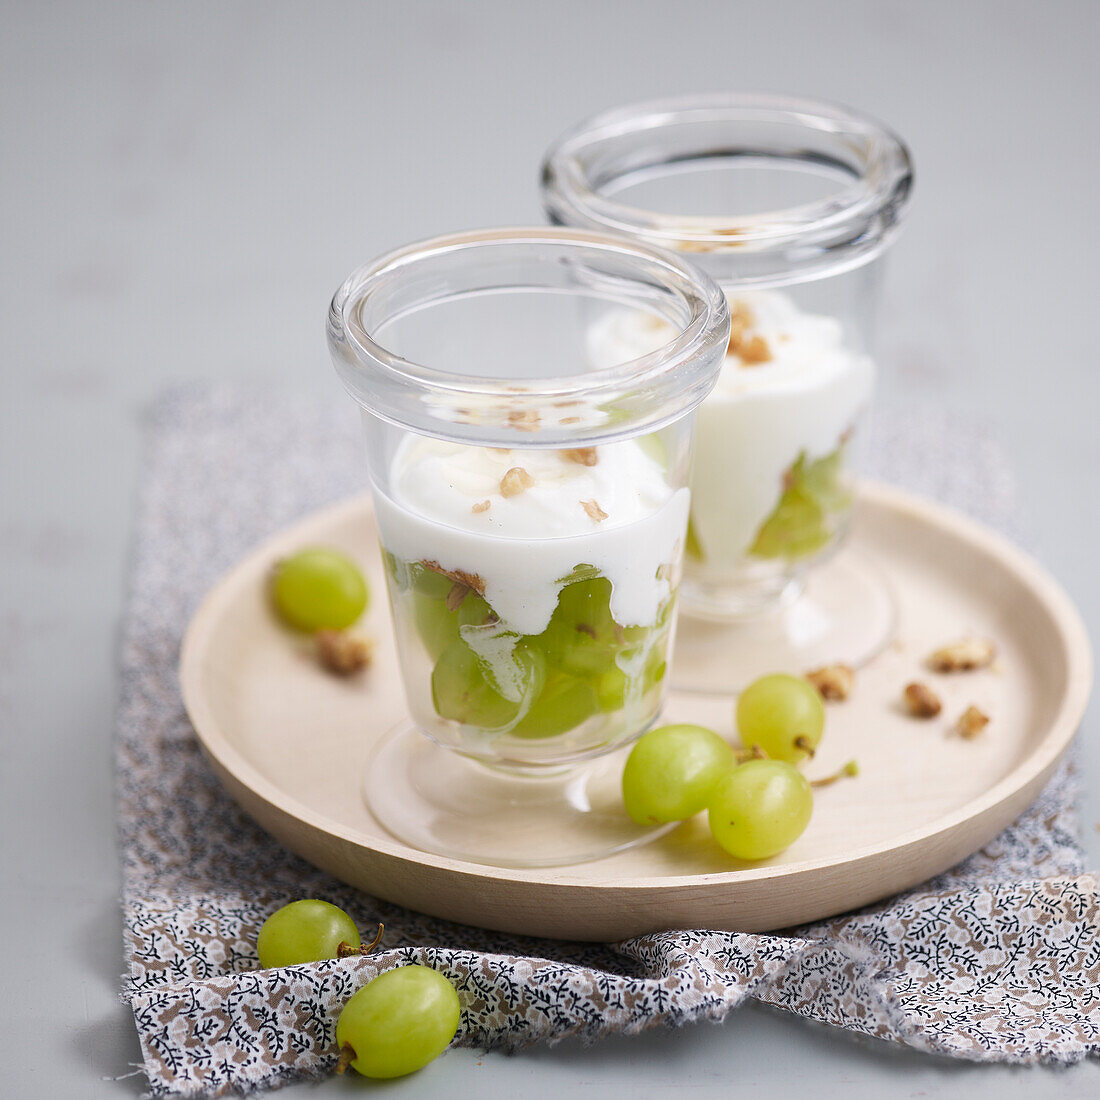 Green grapes topped with cream and walnuts